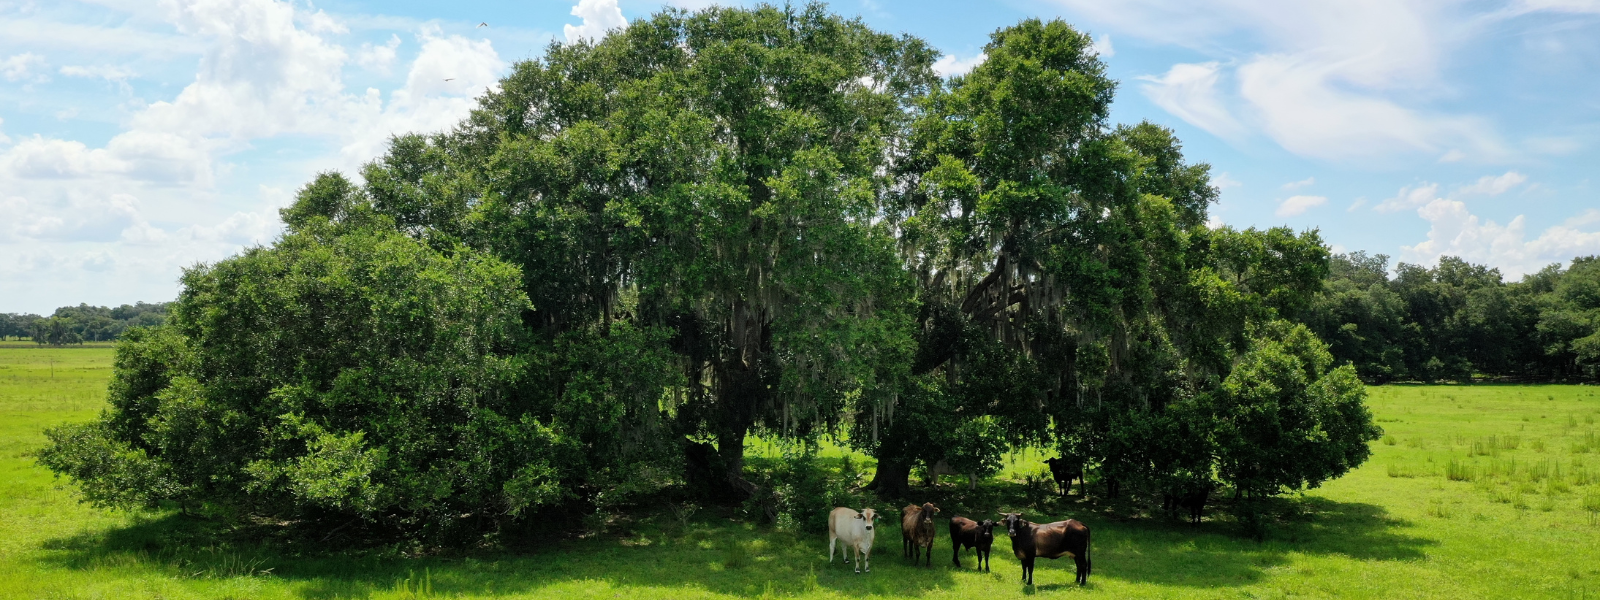 cattle grazing under a large tree